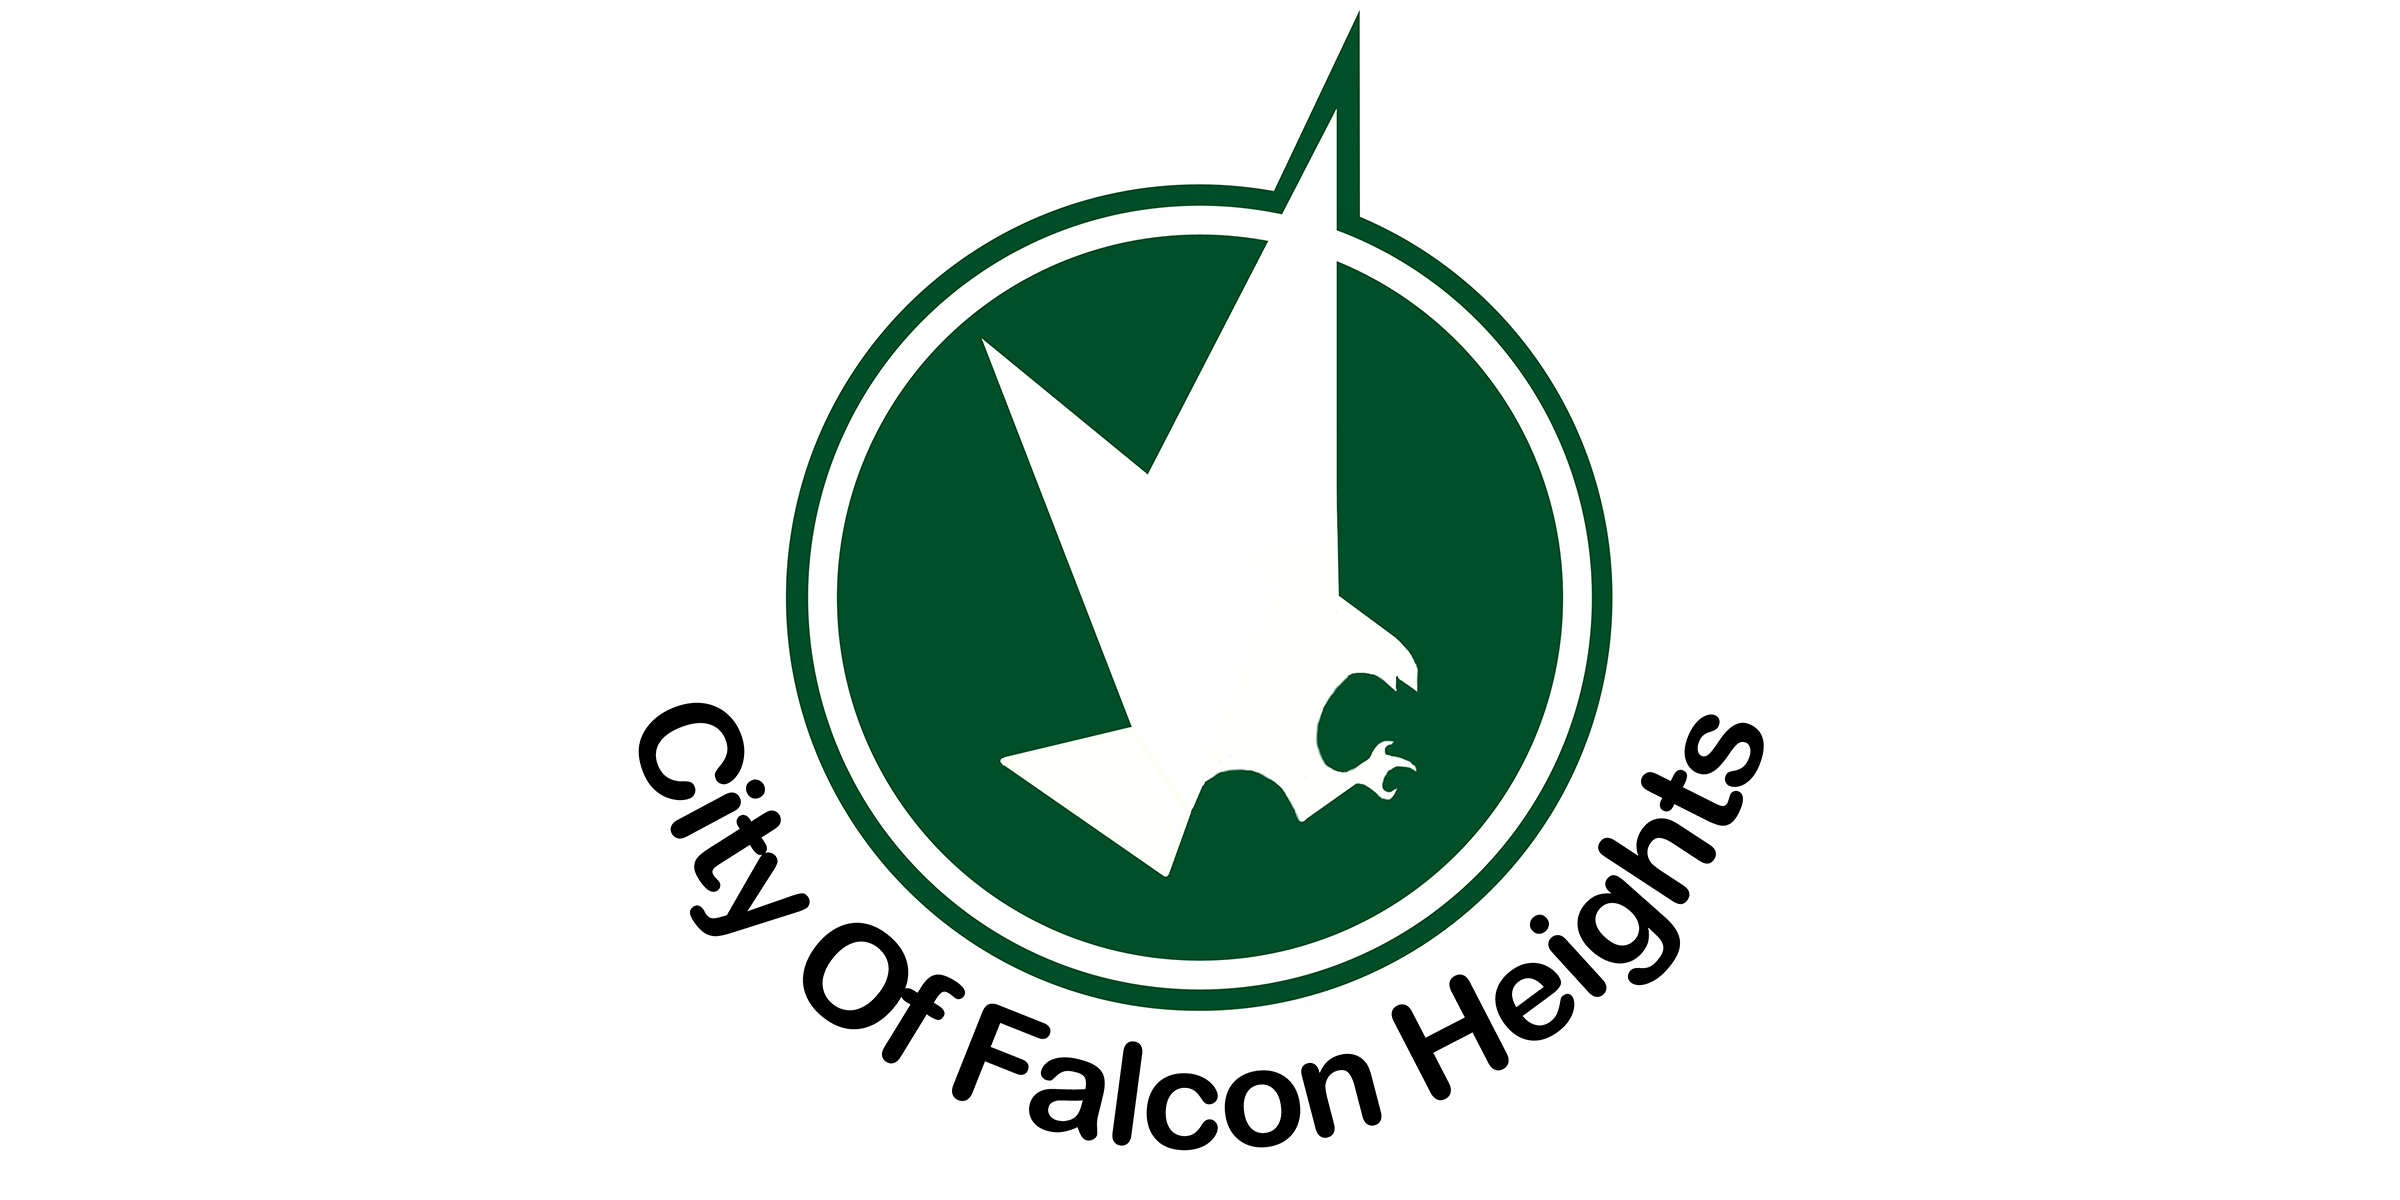 falcon heights